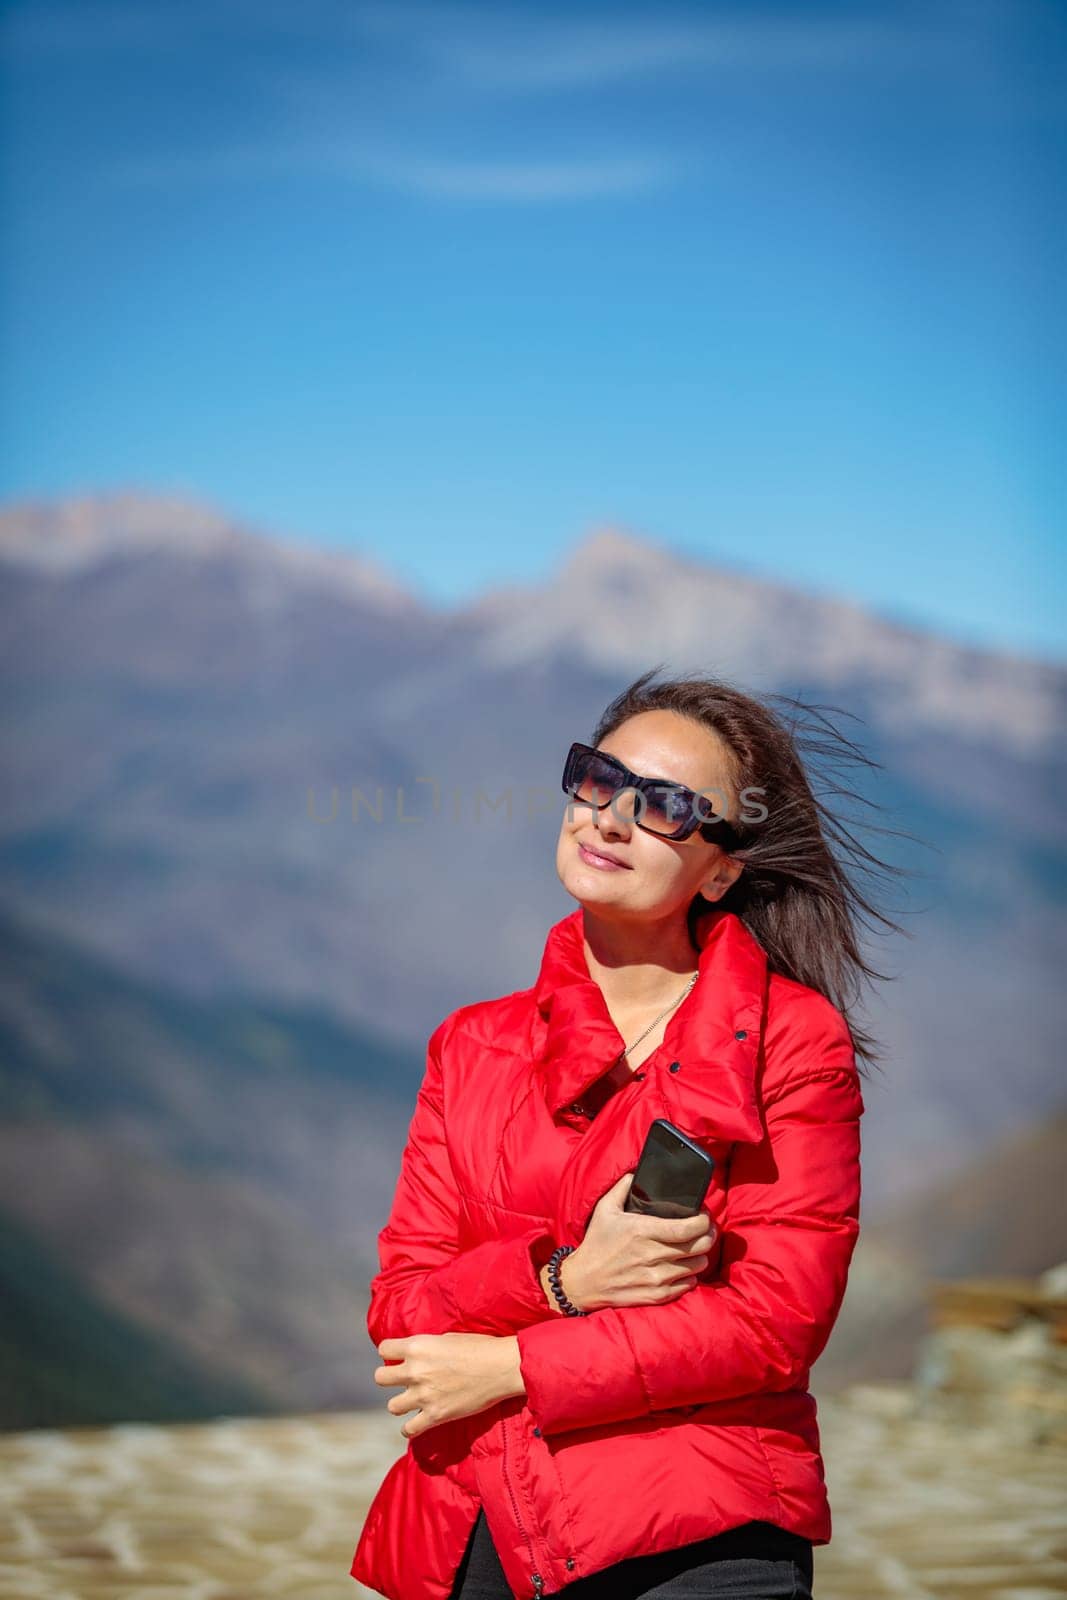 Smiling girl posing in front of snow-capped mountain peak by Yurich32